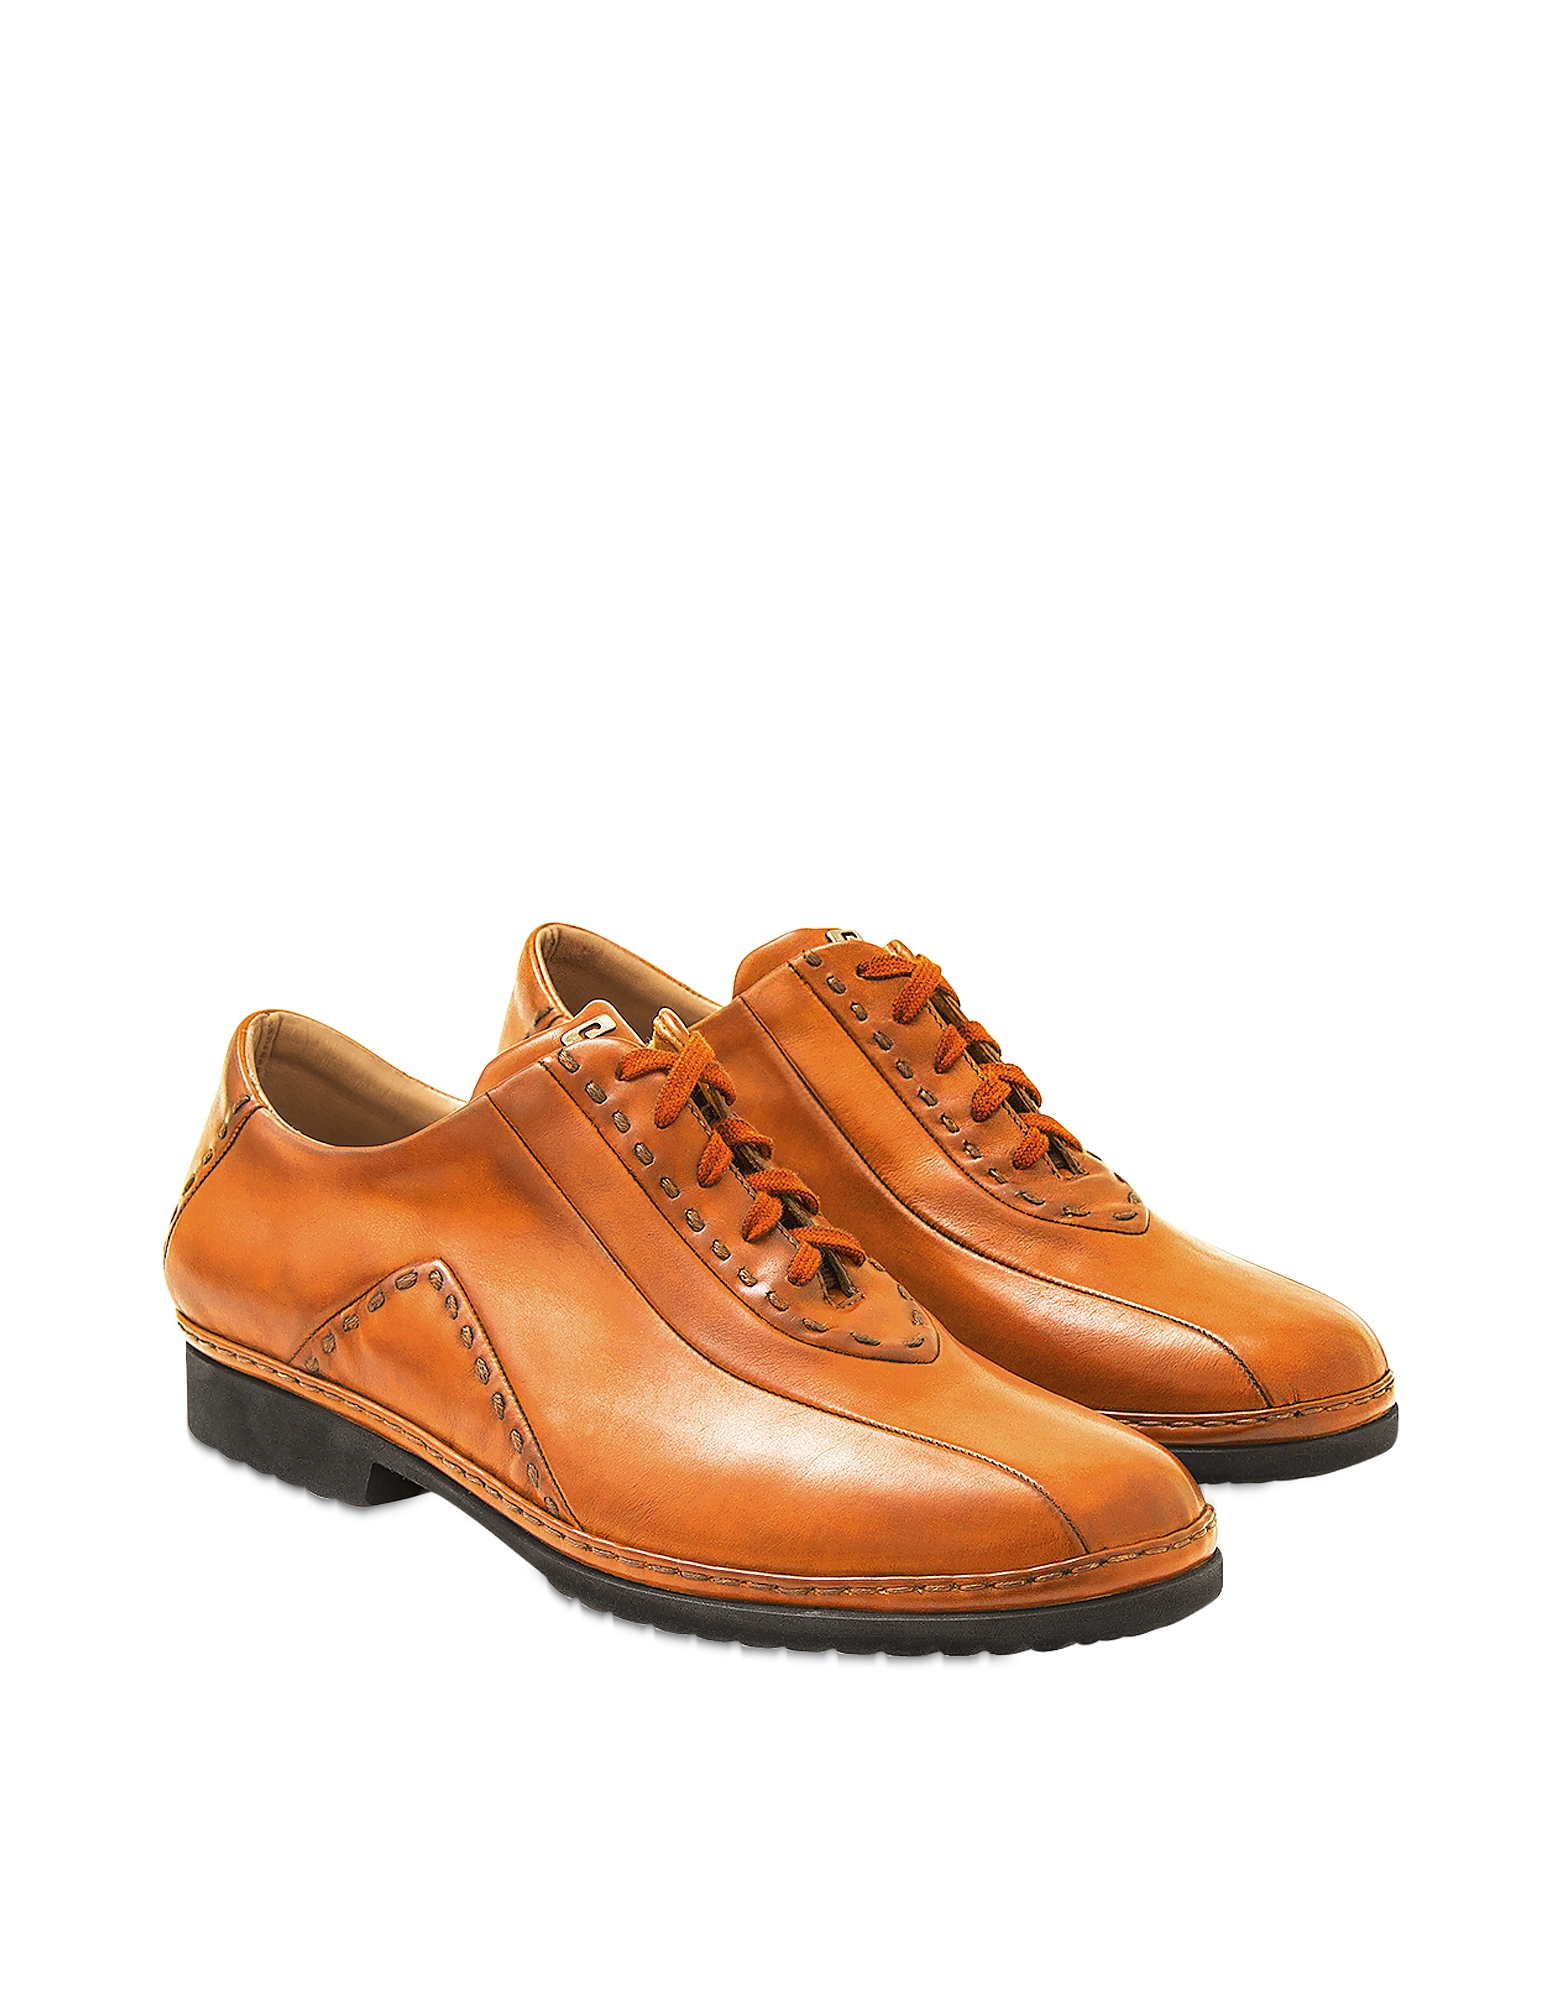 

Orange Italian Hand Made Calf Leather Lace-up Shoes